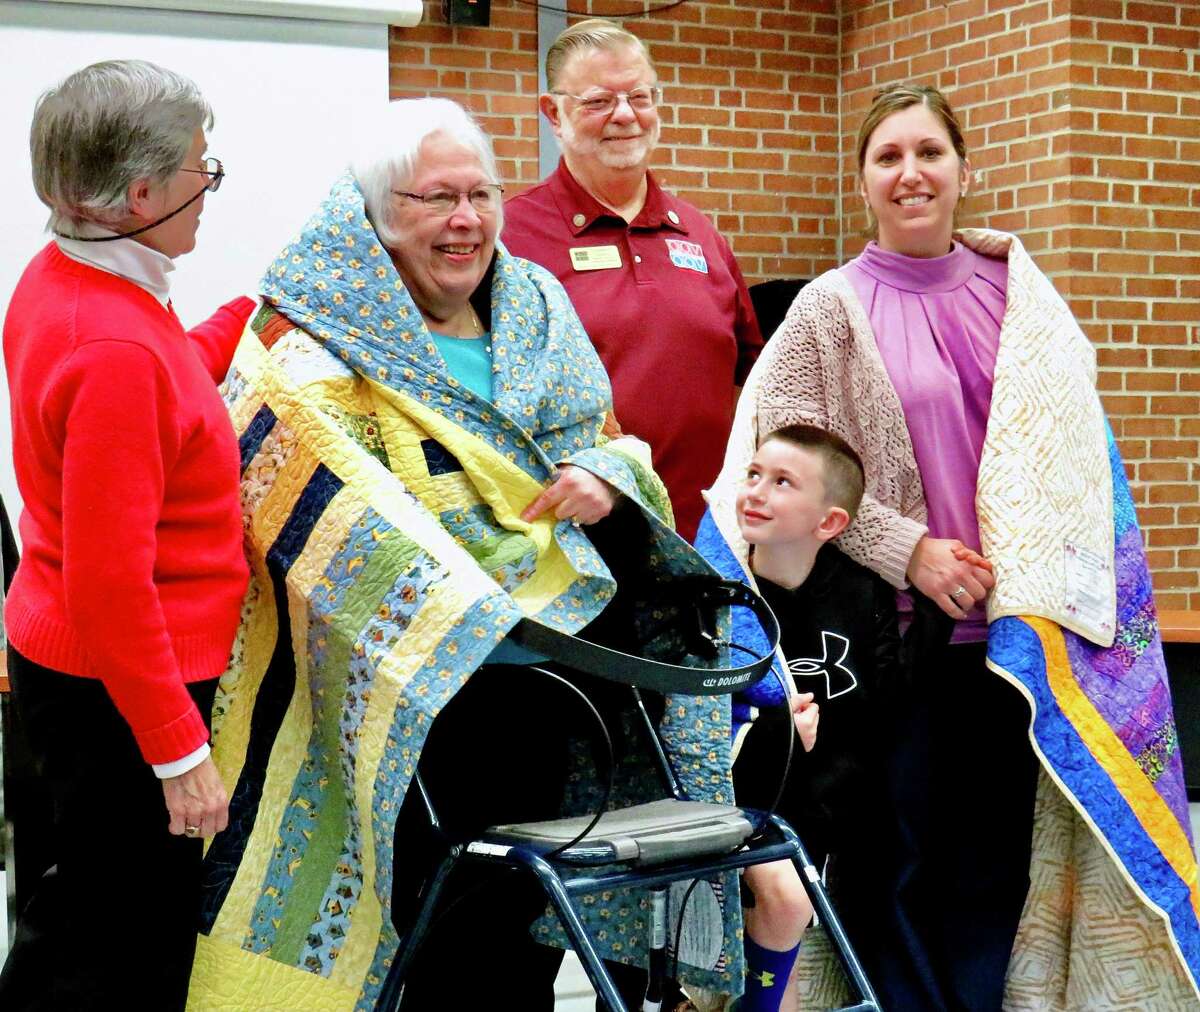 Janet Dougherty of the Quilts of Valor Foundation, with honoree Janet Schmitt, a veteran of the Air Force who served in the Vietnam era; the Quilt of Valor Foundation’s Chuck Larkins; Charleen Fischer, senior master sergeant in the CT Air National Guard; and her son James